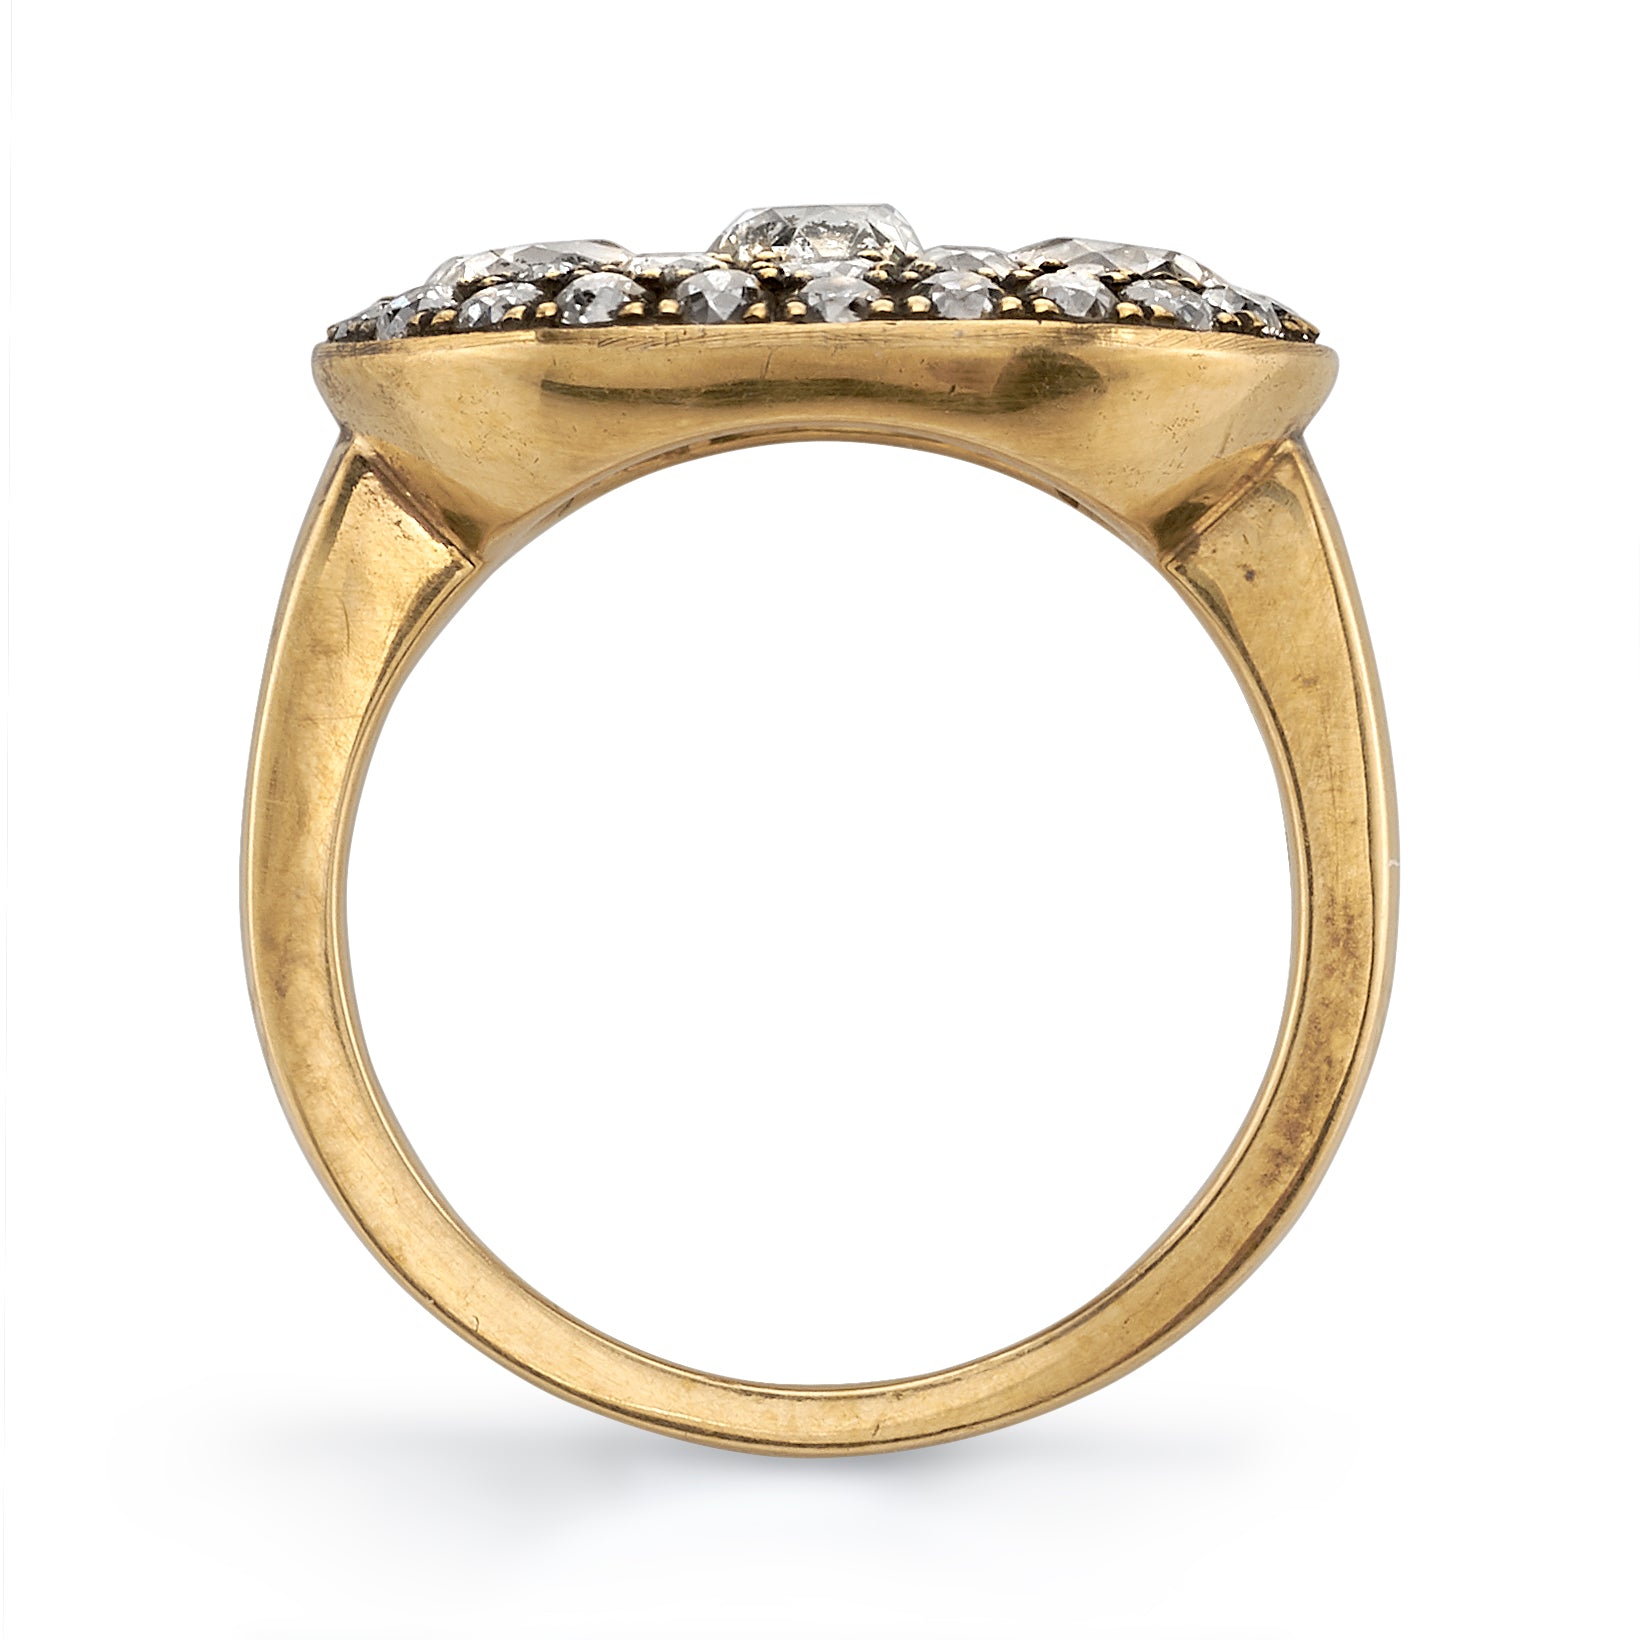 SINGLE STONE LEXY RING featuring 2.36ctw VS/SI varying old cut and round brilliant cut diamonds set in a handcrafted, oxidized 18K yellow gold mounting.